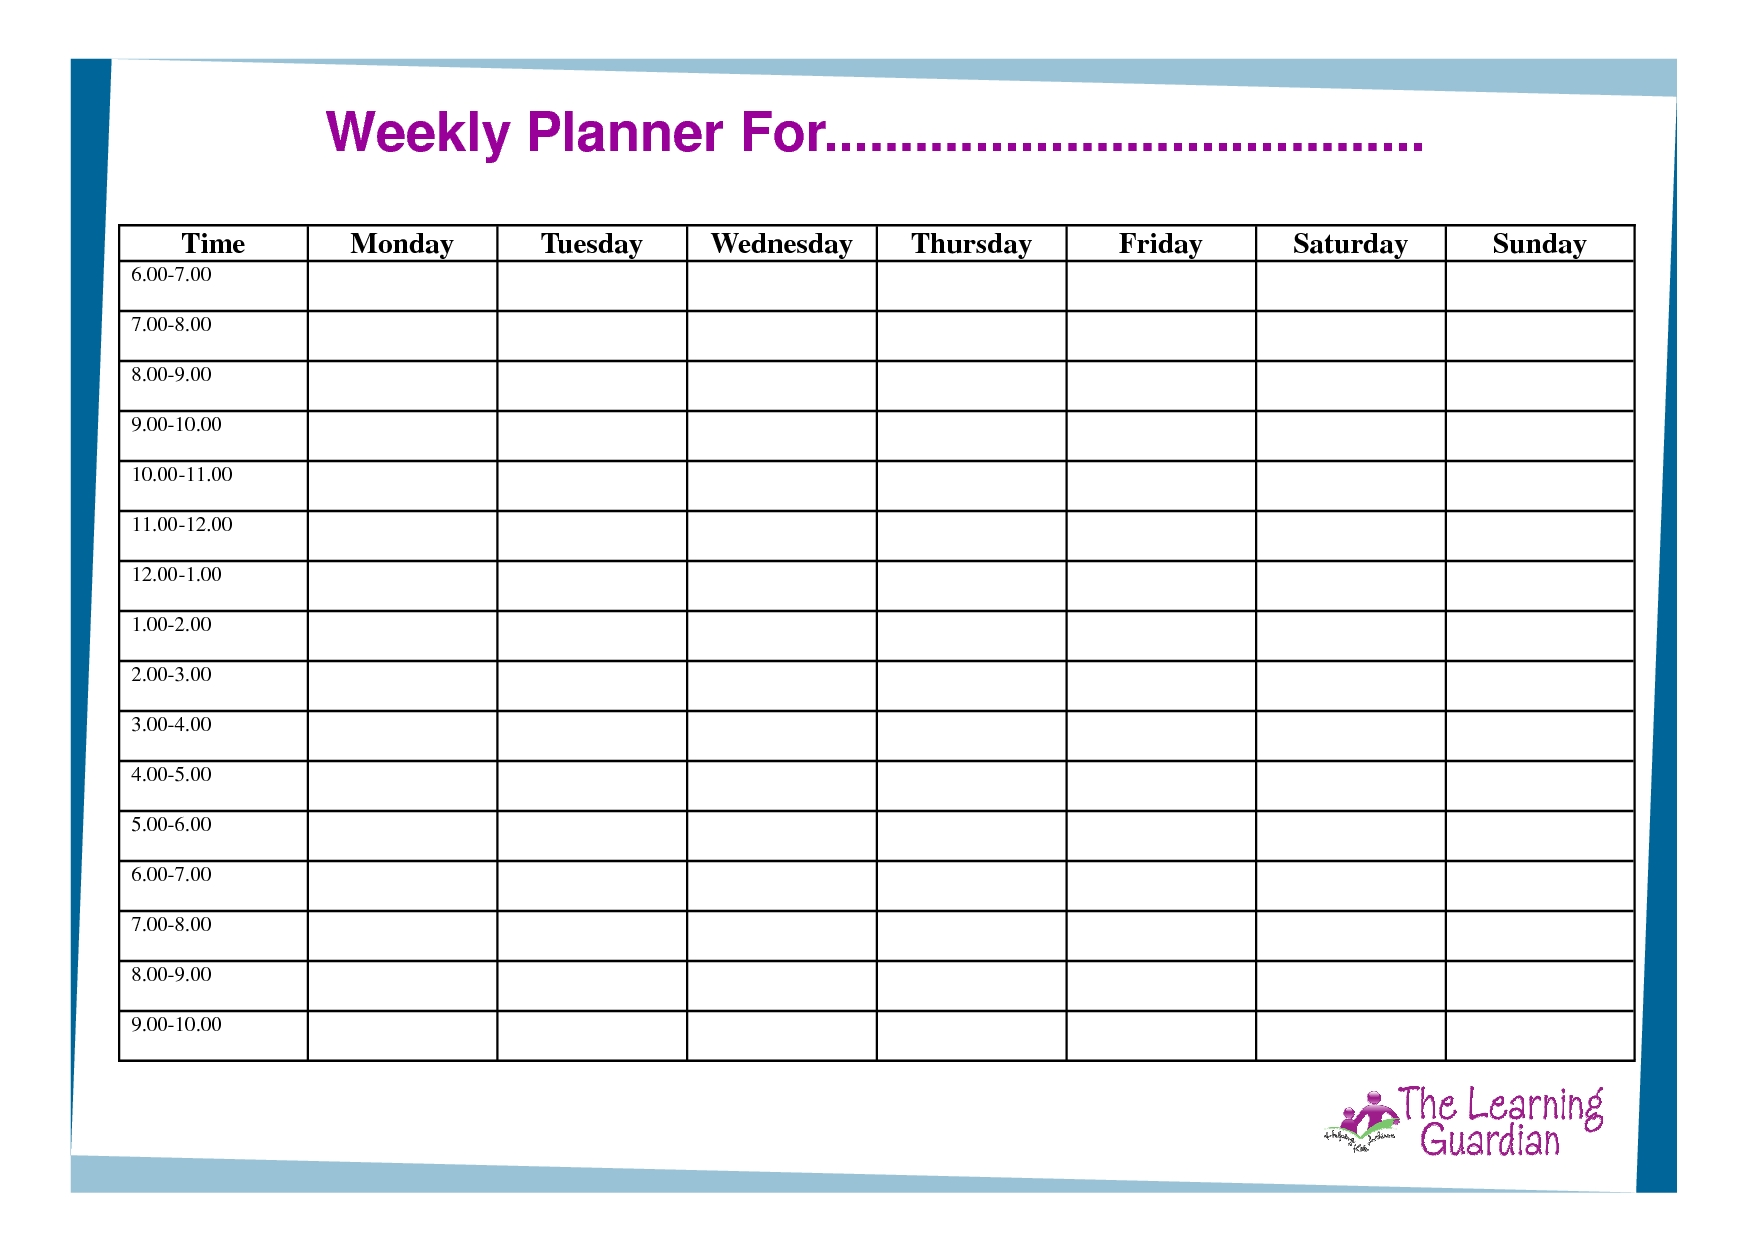 Weekly Planner With Time Slots Word Template